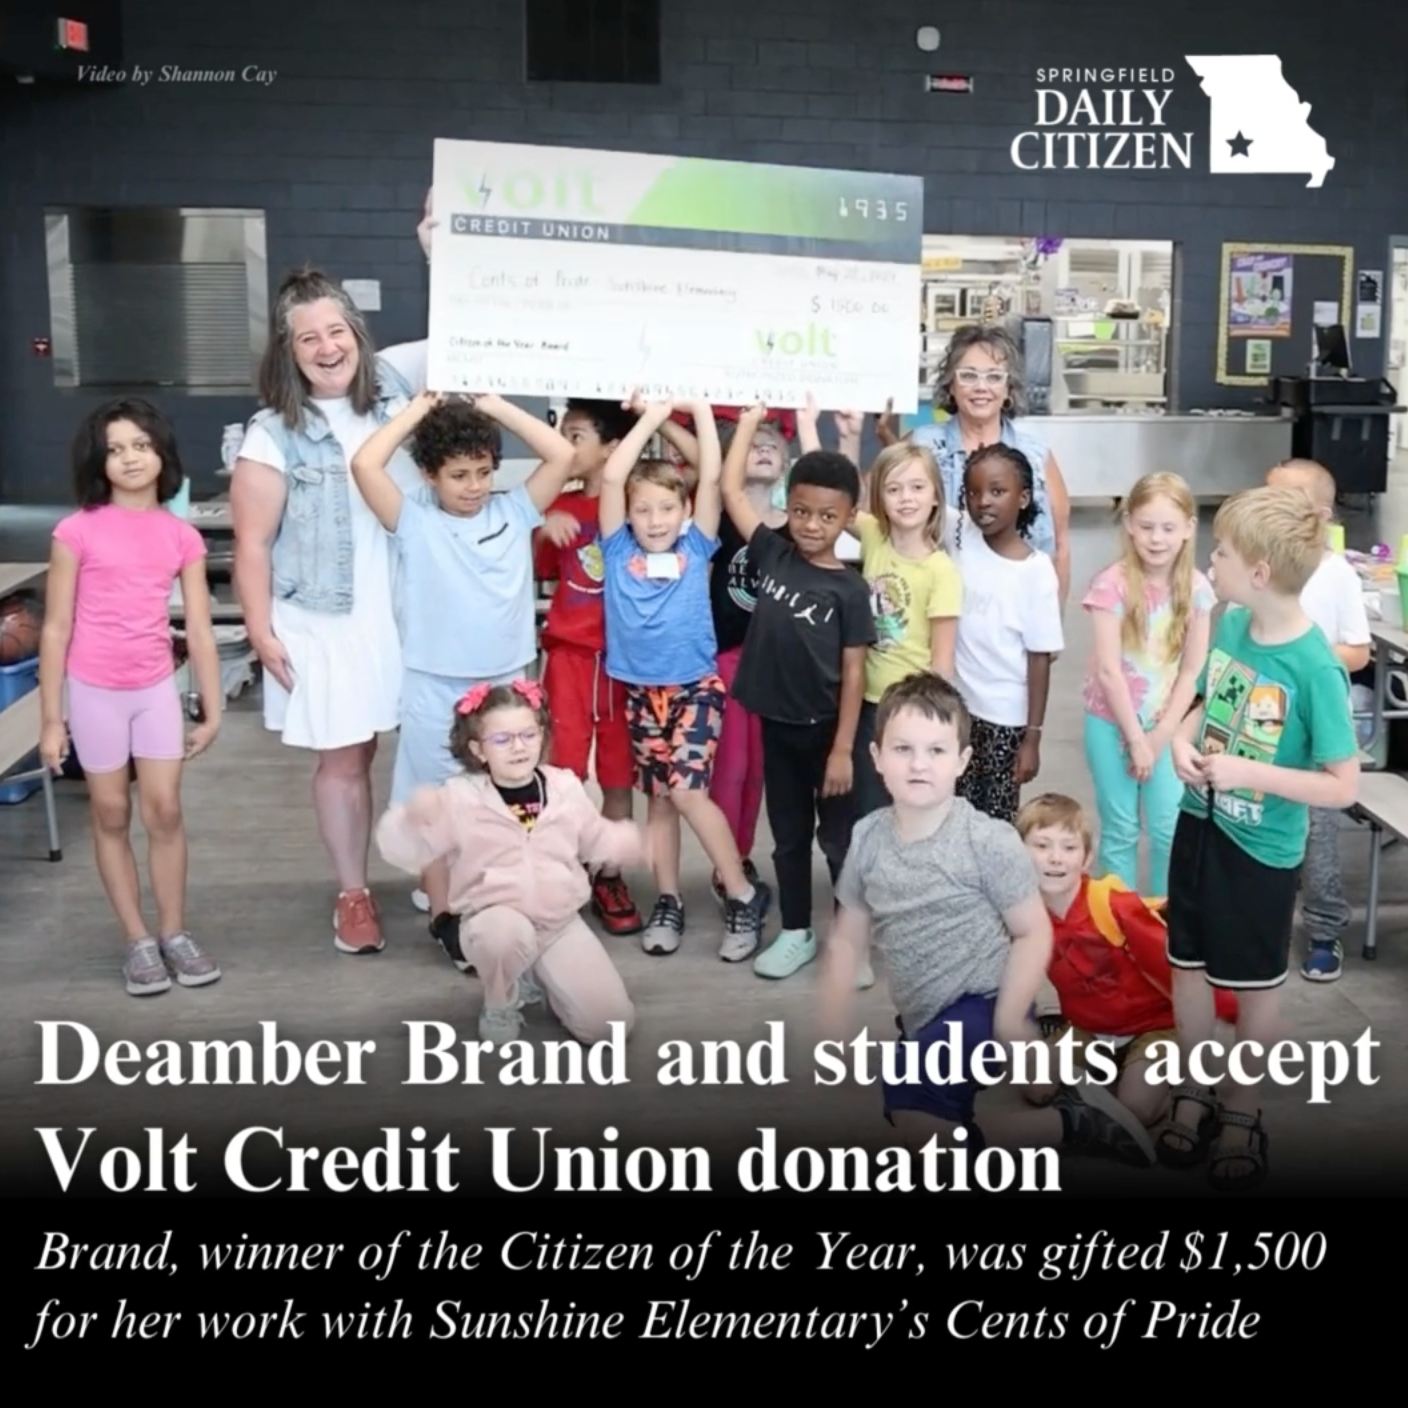 Deamber Brand and several Sunshine Elementary students hold up a giant check in the school's cafeteria. Text on the image reads: "Deamber Brand and students accept Volt Credit Union donation. Brand, winner of Citizen of the Year, was gifted $1,500 for her work with Sunshine Elementary's Cents of Pride."